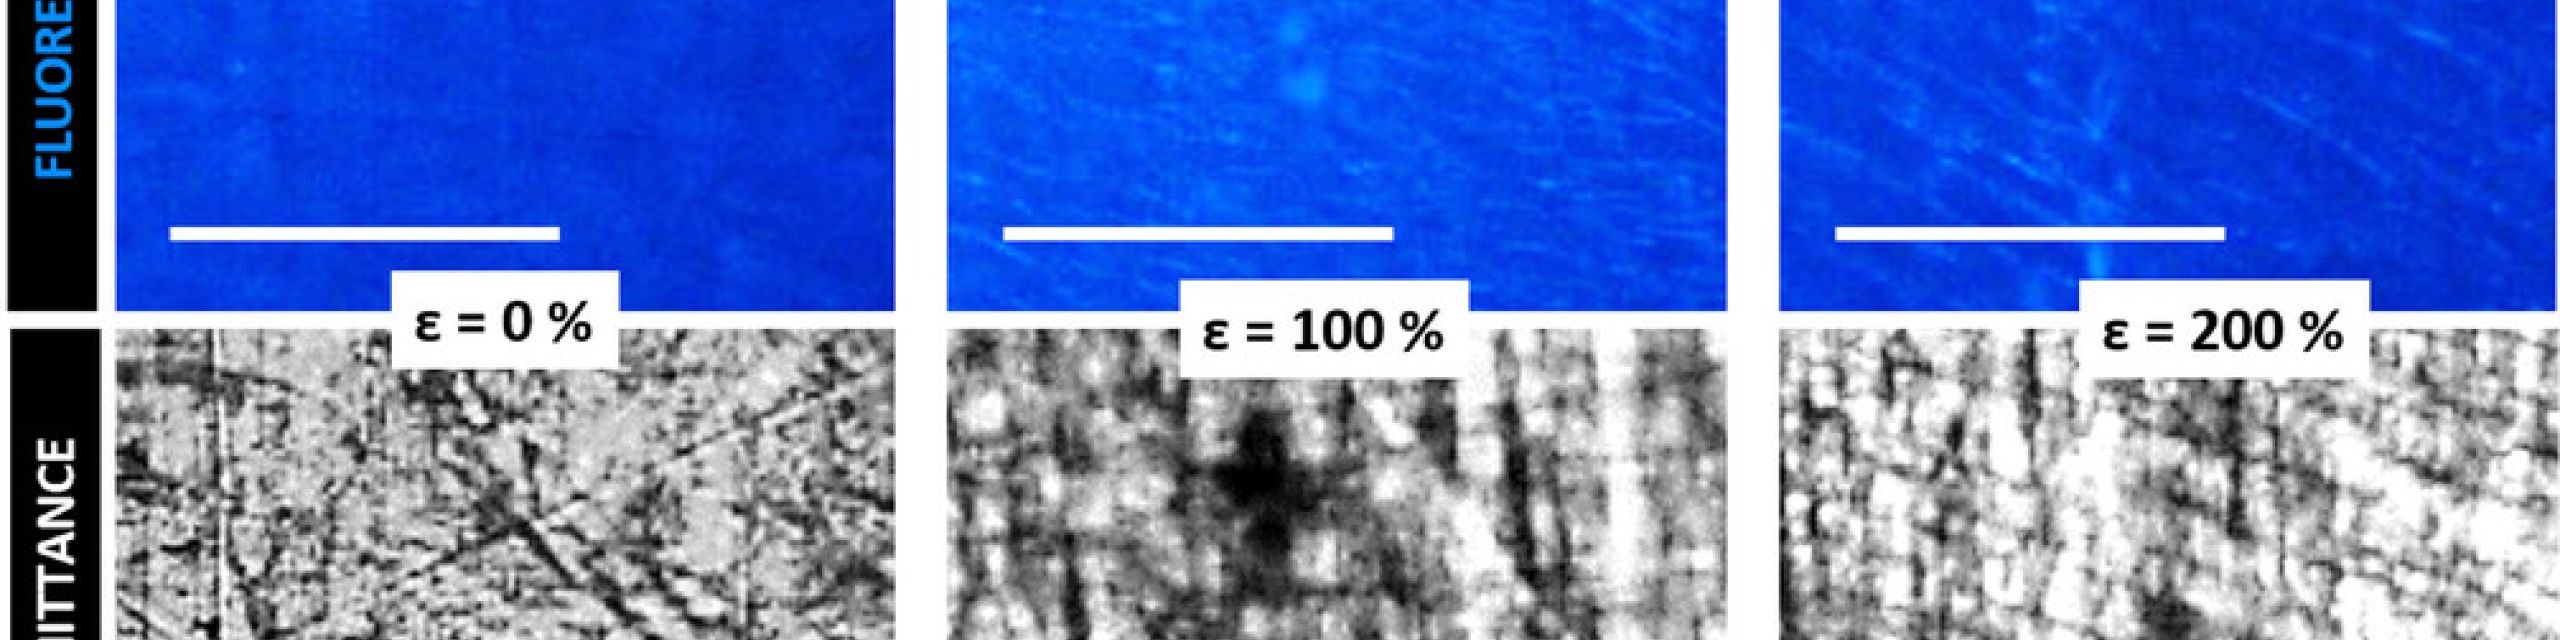 Wide range microscope images of PVAc-TPE at 0%, 100%, and 200% strain (ε)...